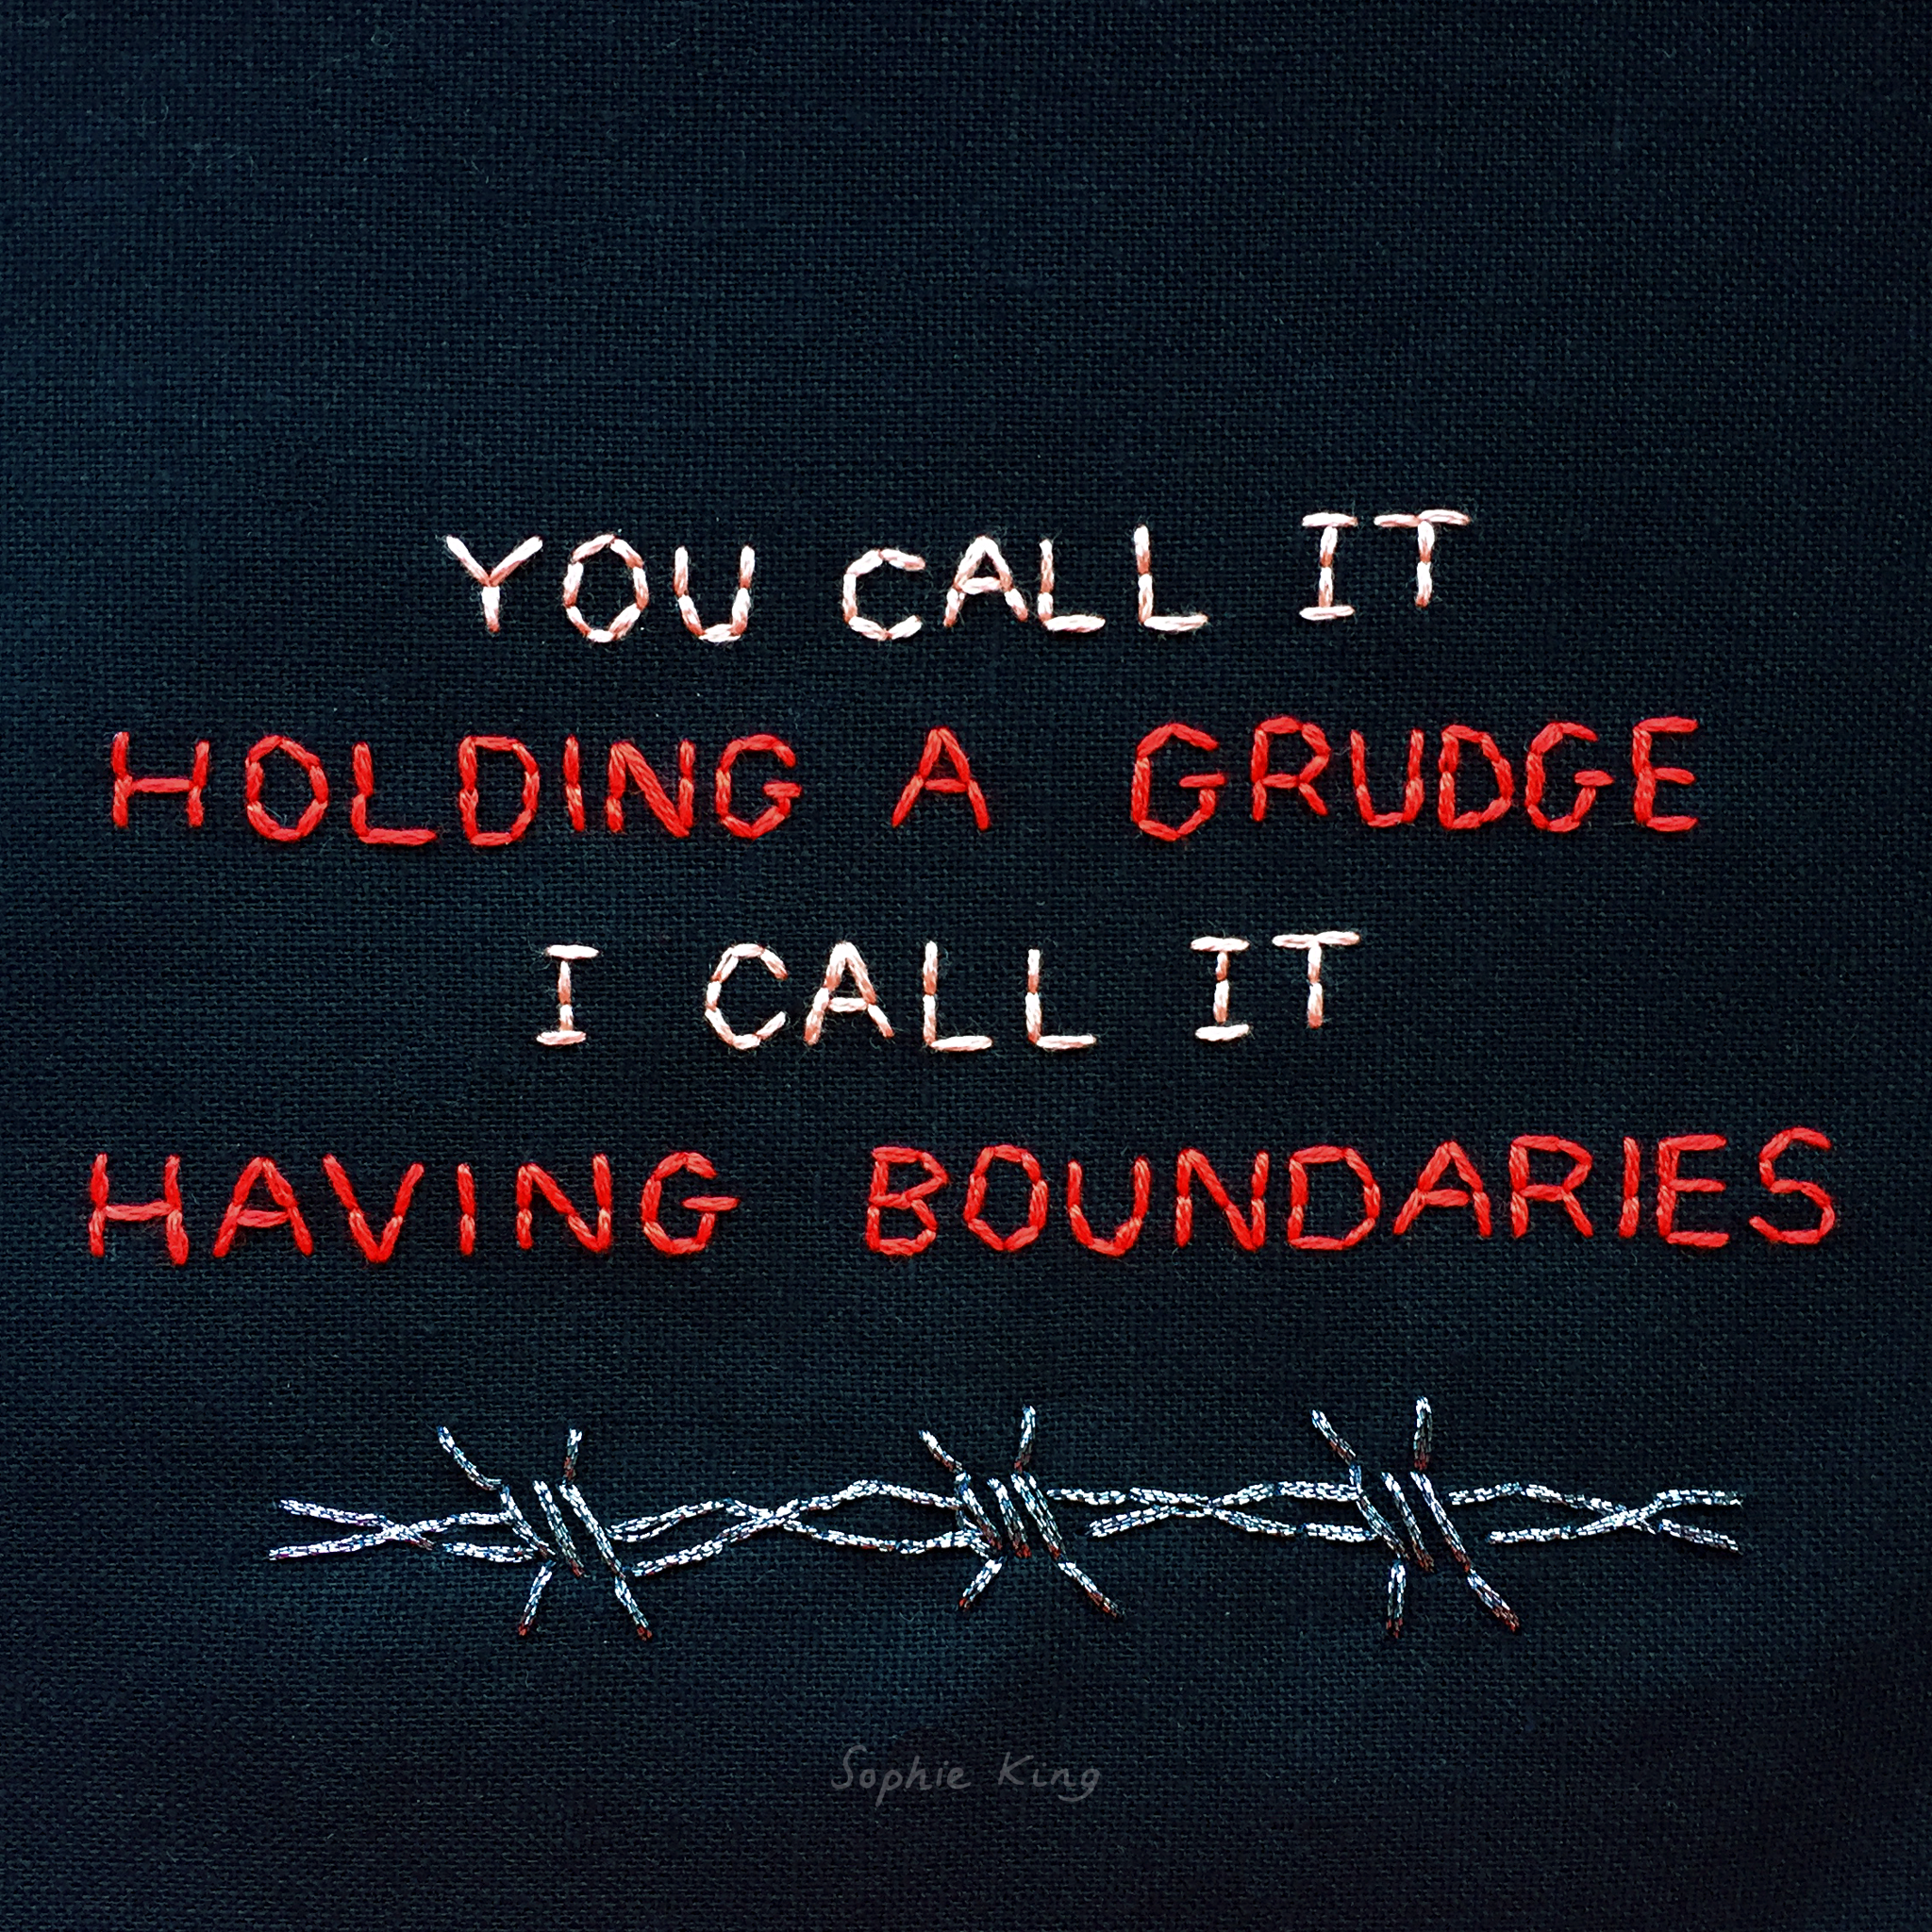 embroidered "you call it holding a grudge, I call it having boundaries" 2019, Sophie King